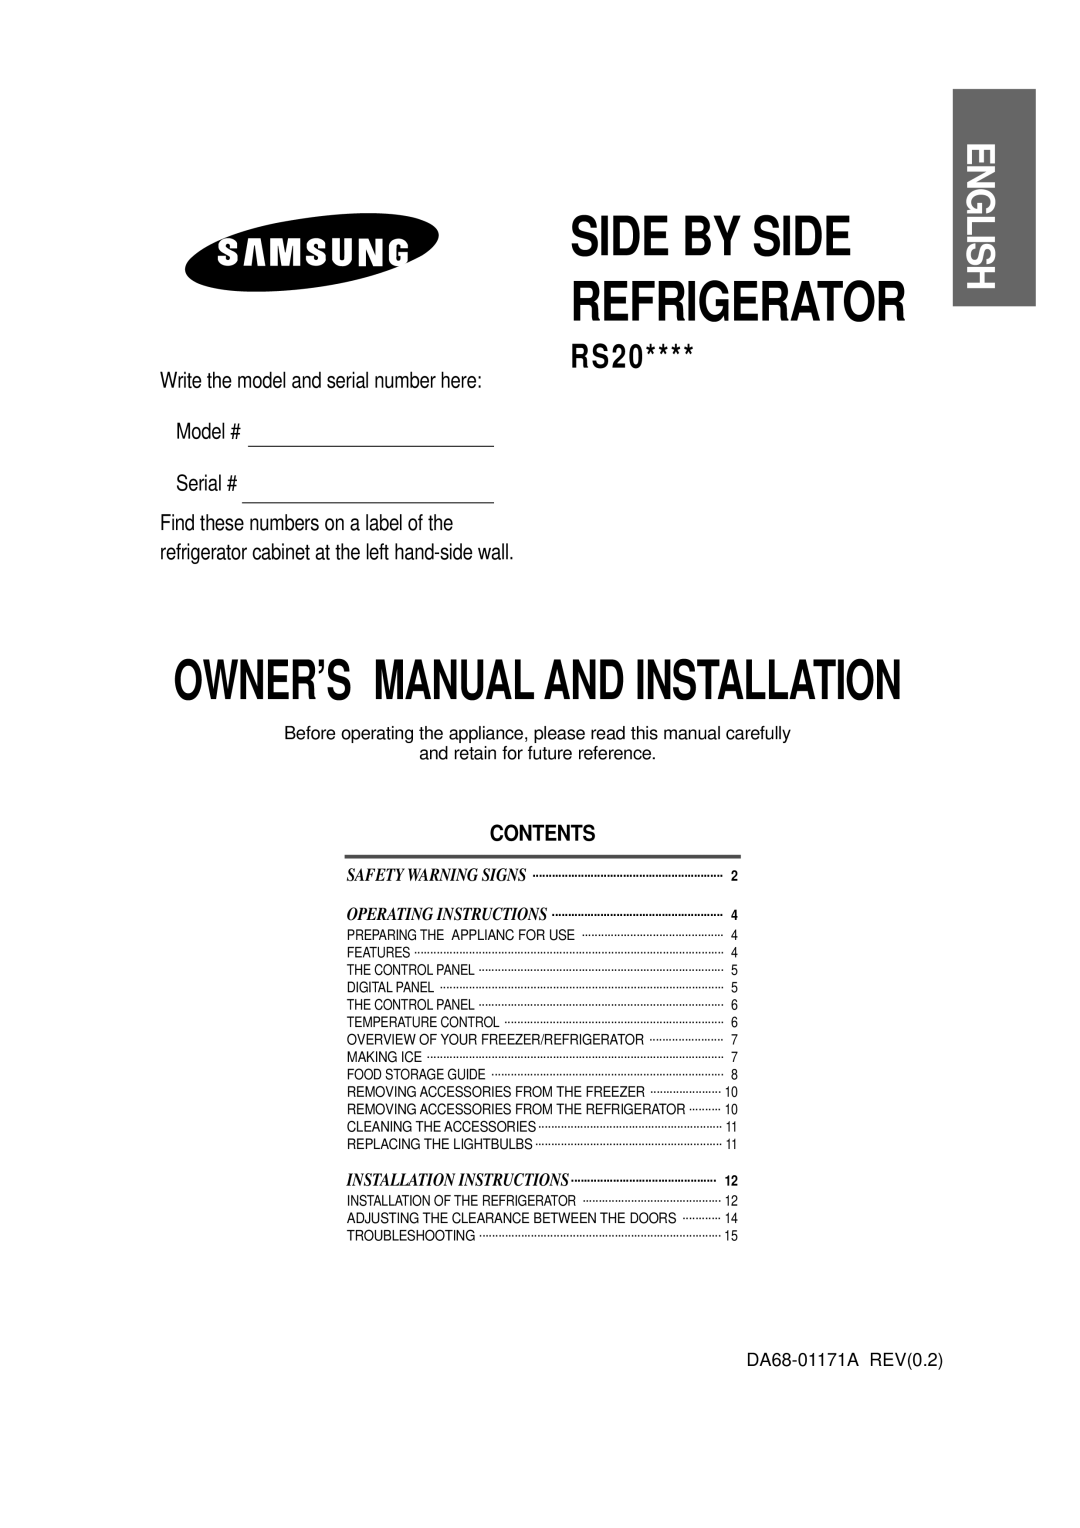 Samsung RS20 owner manual Contents, Side By Side Refrigerator, English, Write the model and serial number here Model # 